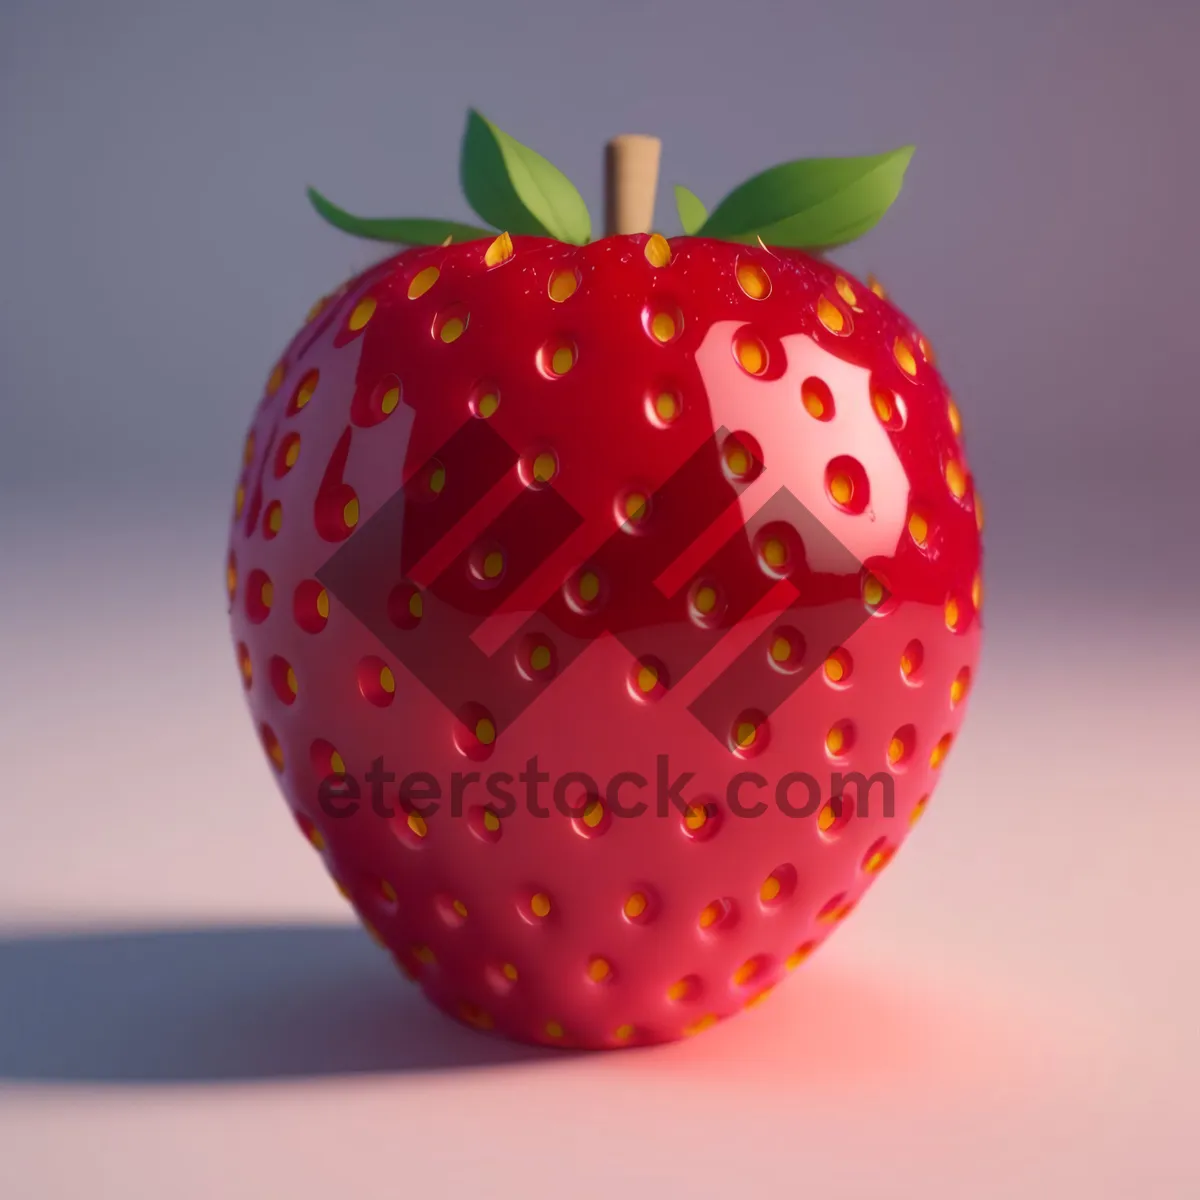 Picture of Delicious Strawberry Fruit Snack: Colorful, Juicy, and Healthy